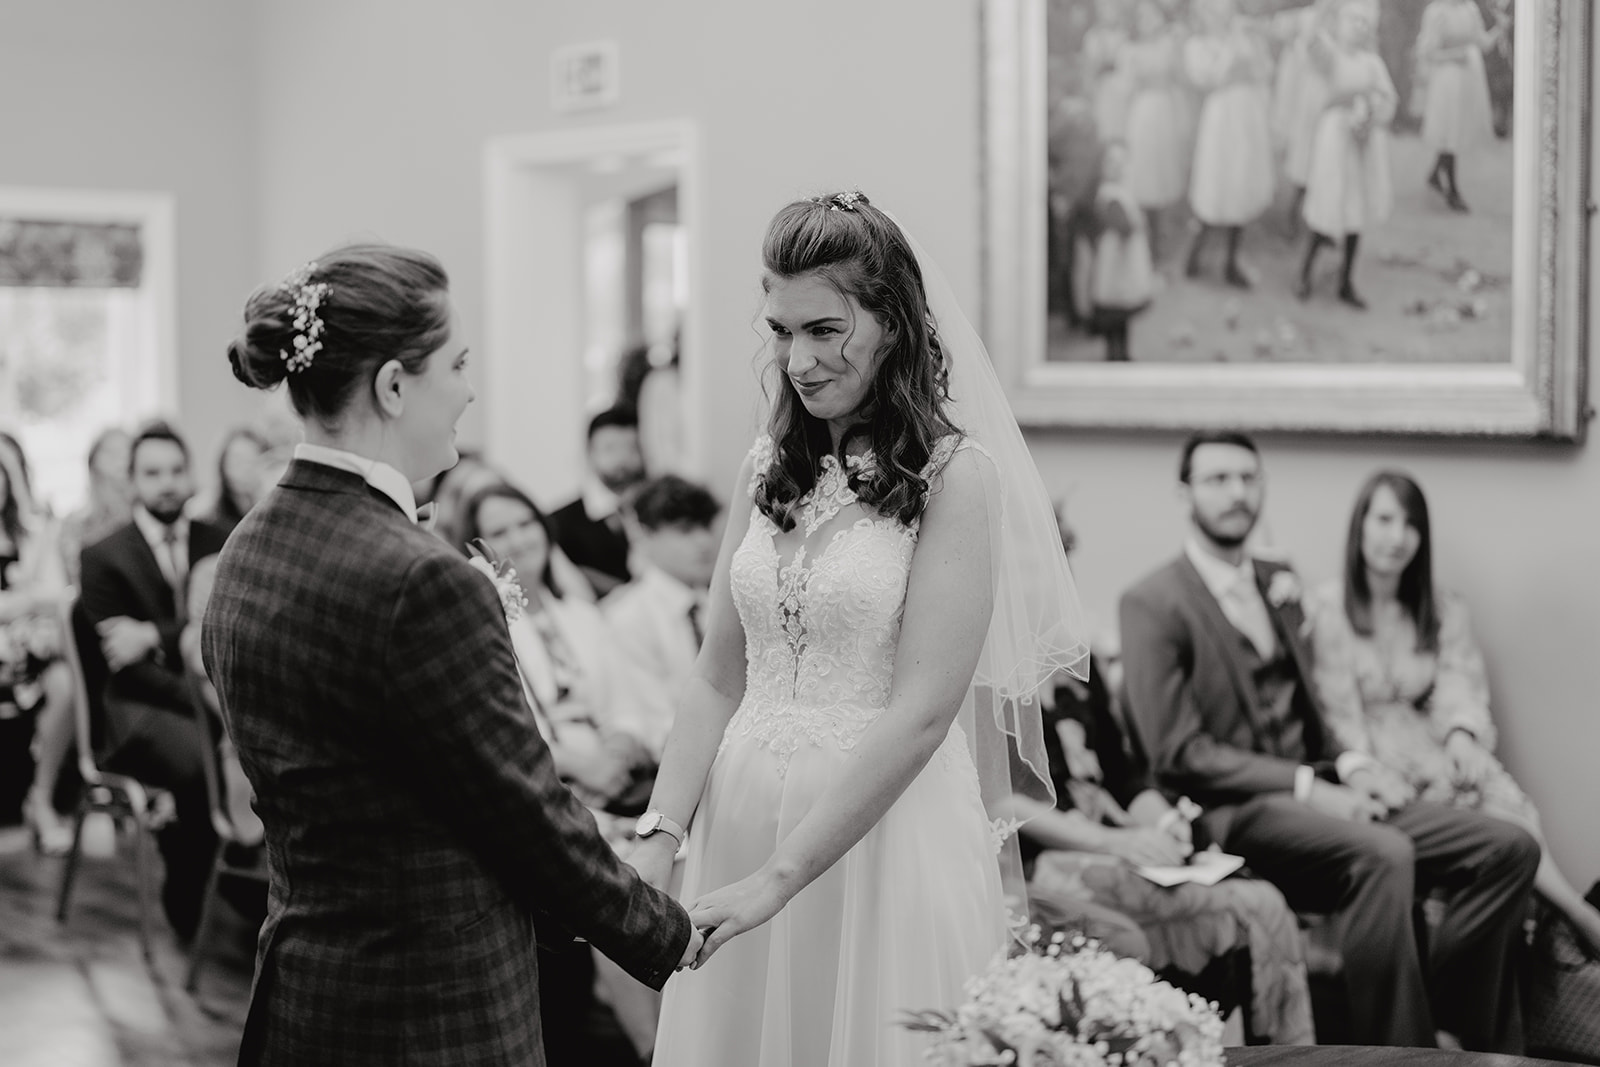 The Brewhouse & Kitchen Wedding Photography - the bride taking in a deep breath during the wedding ceremony